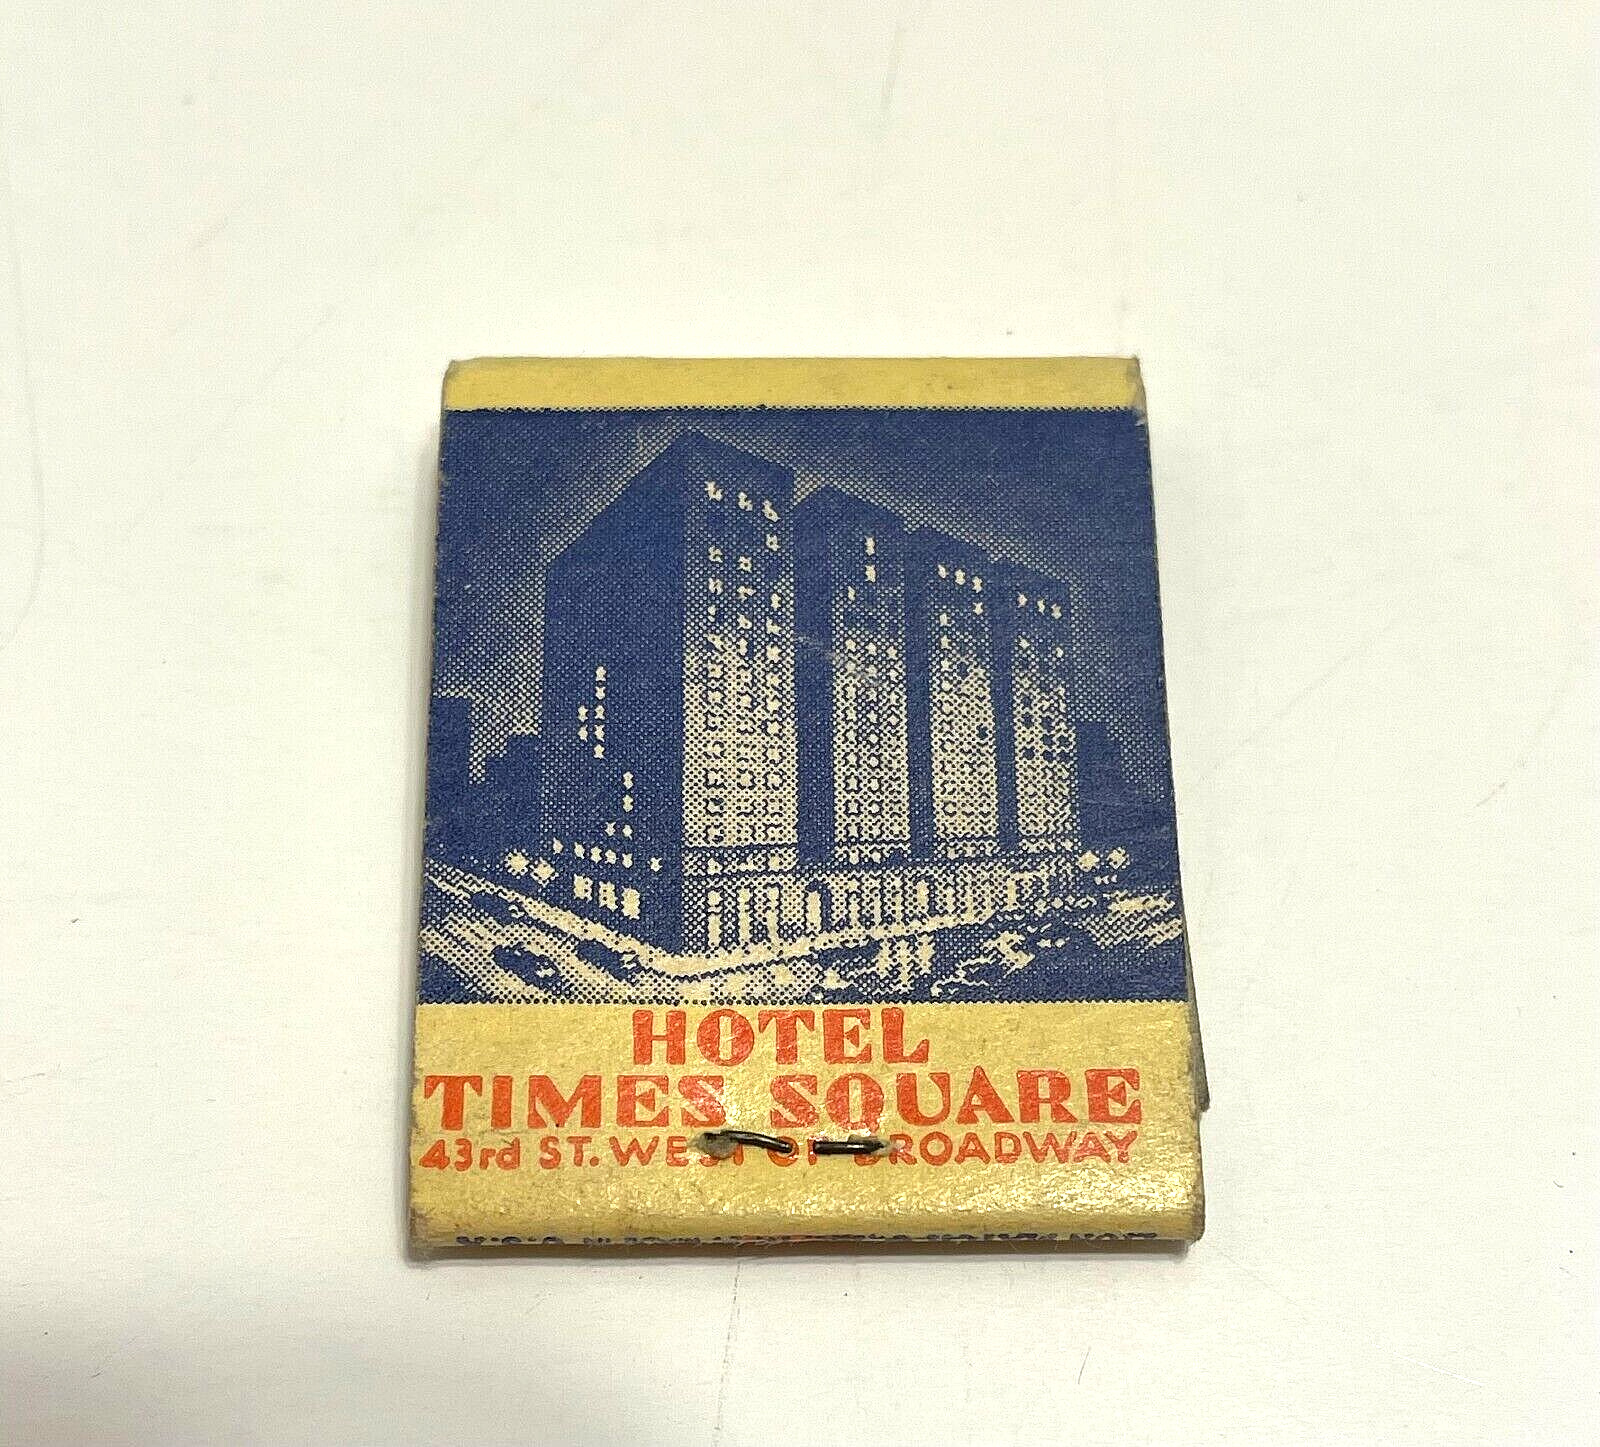 Vintage Matchbook Collectible Ephemera NYC Hotel Times Square Broadway